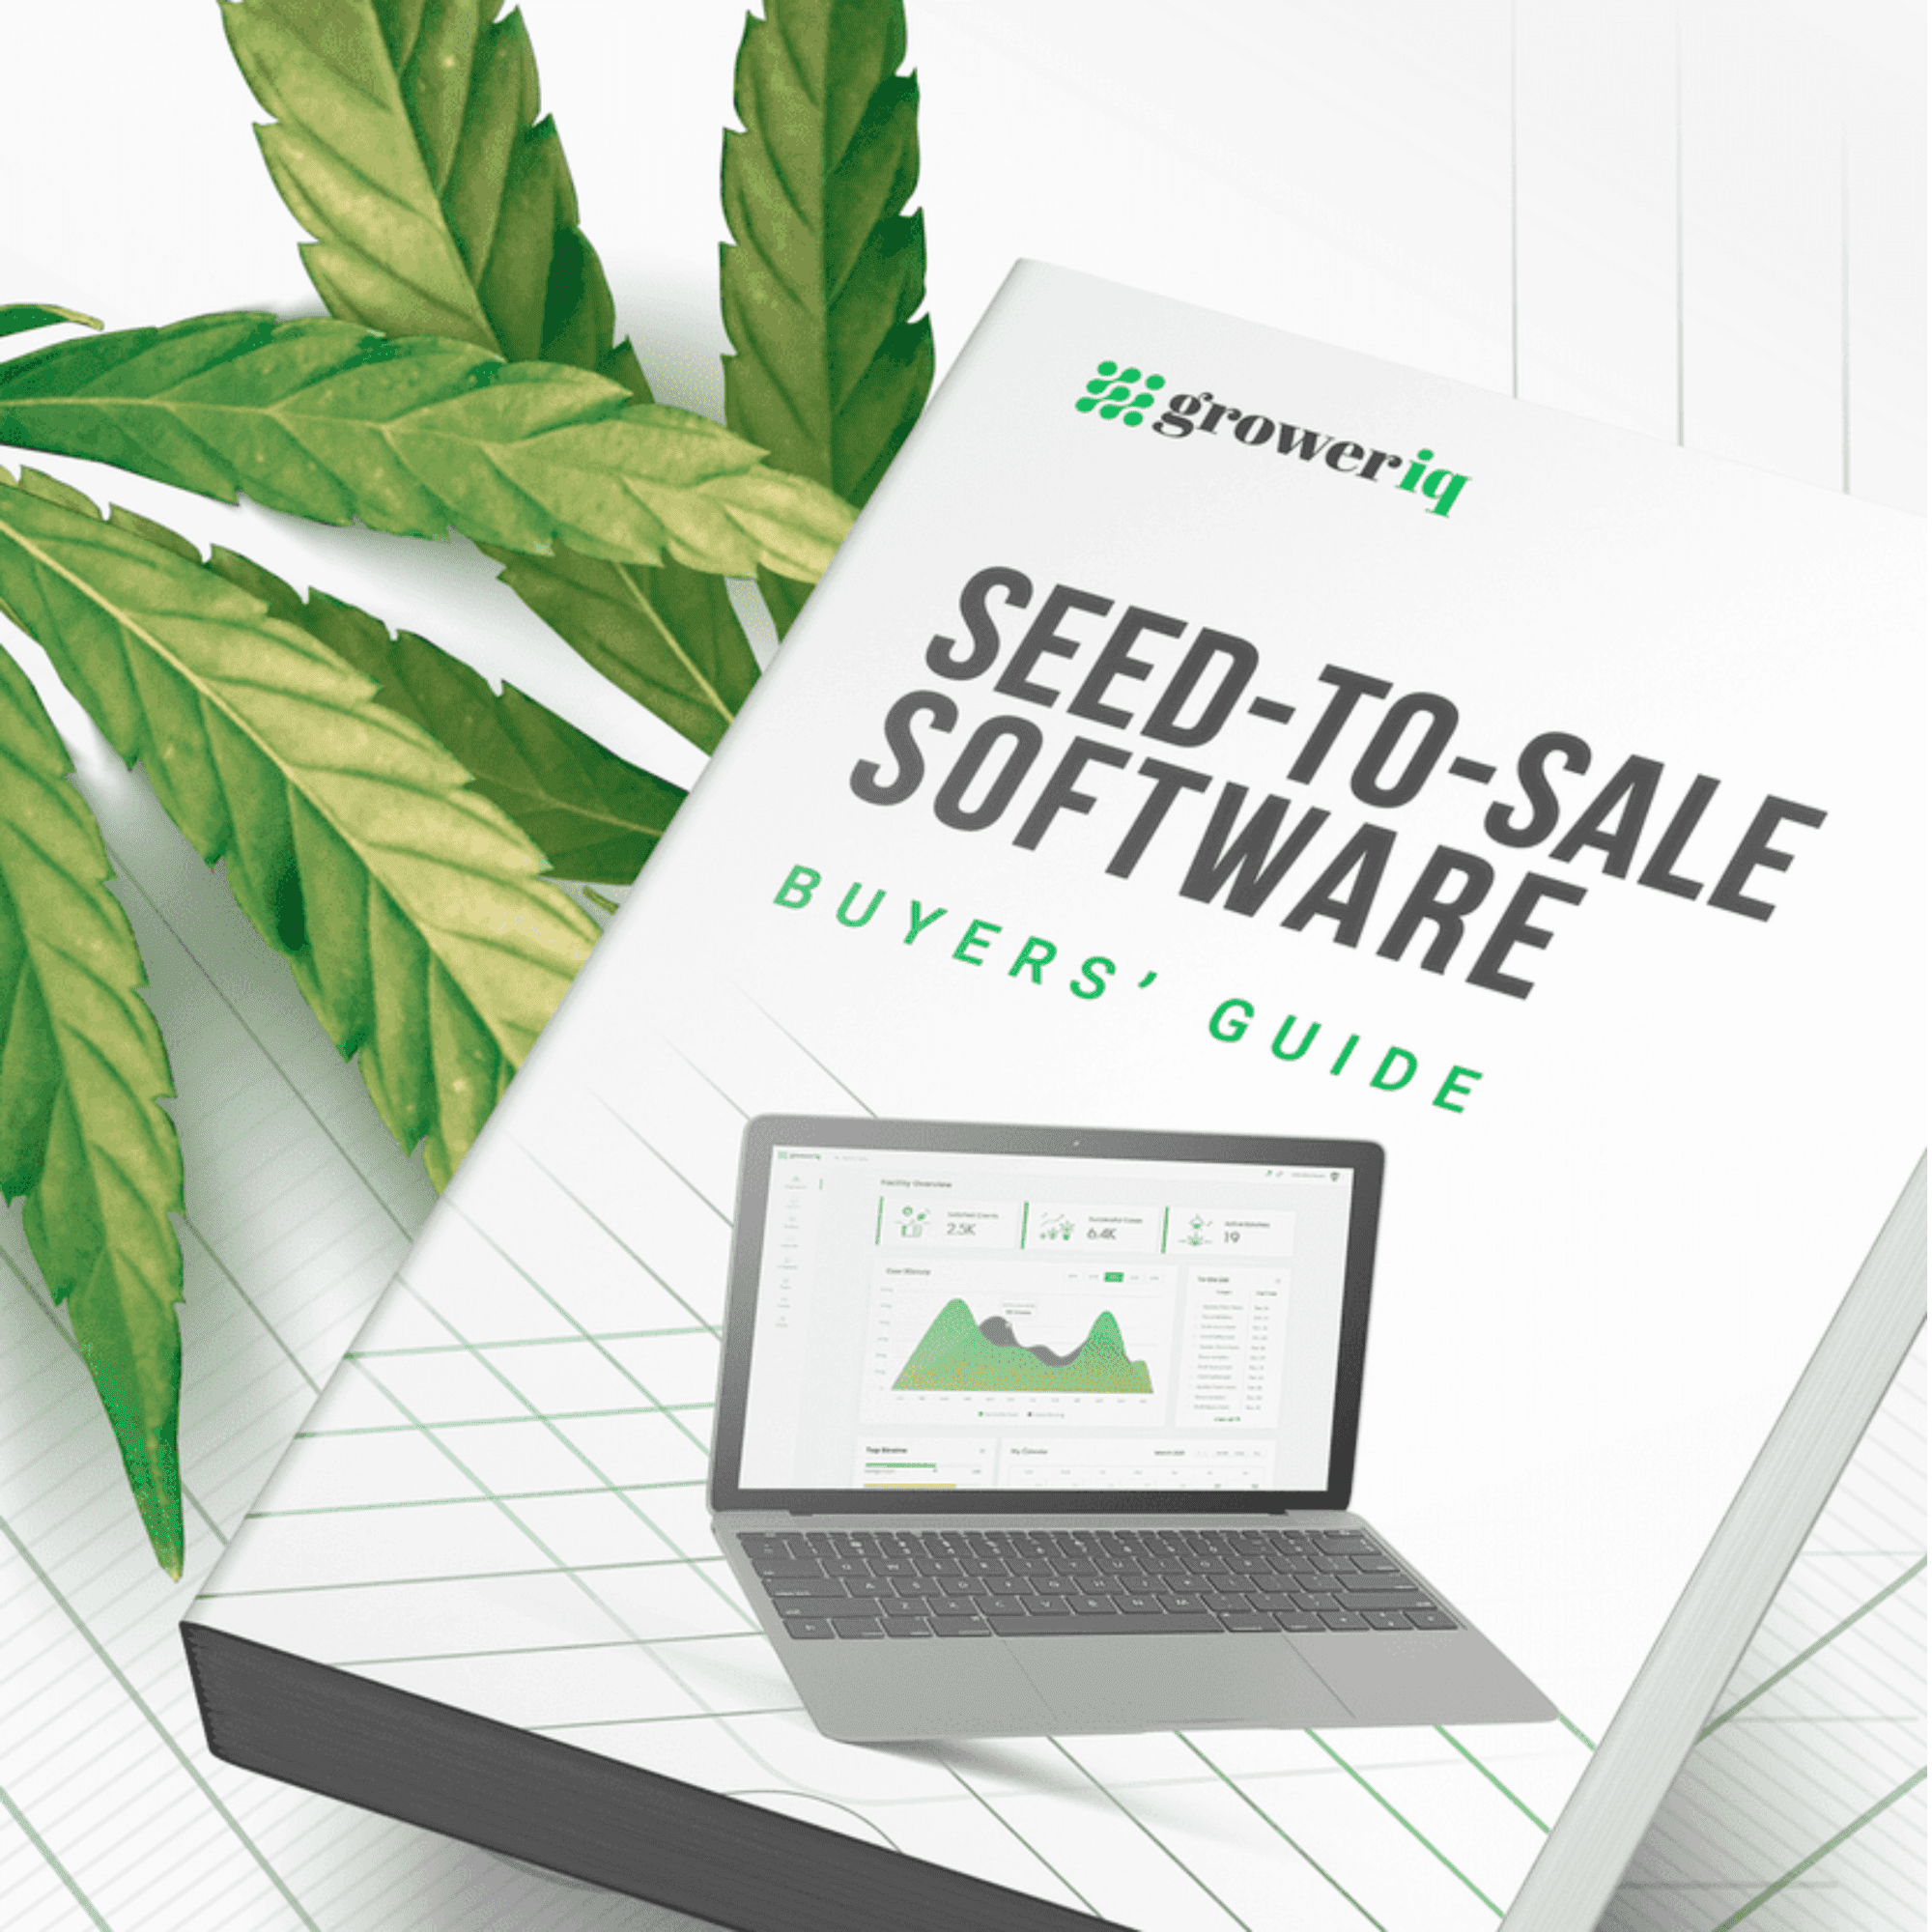 Seed-to-Sale Software Guide